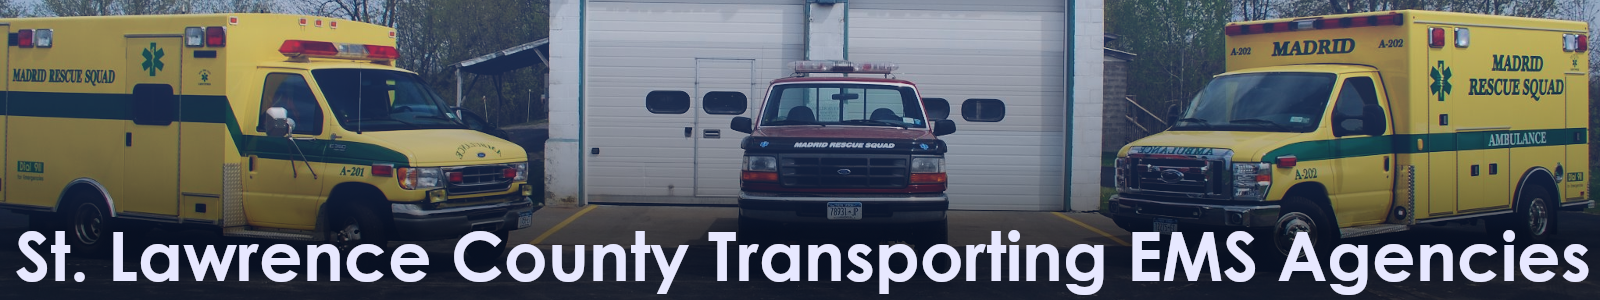 St. Lawrence County Transporting EMS Agencies